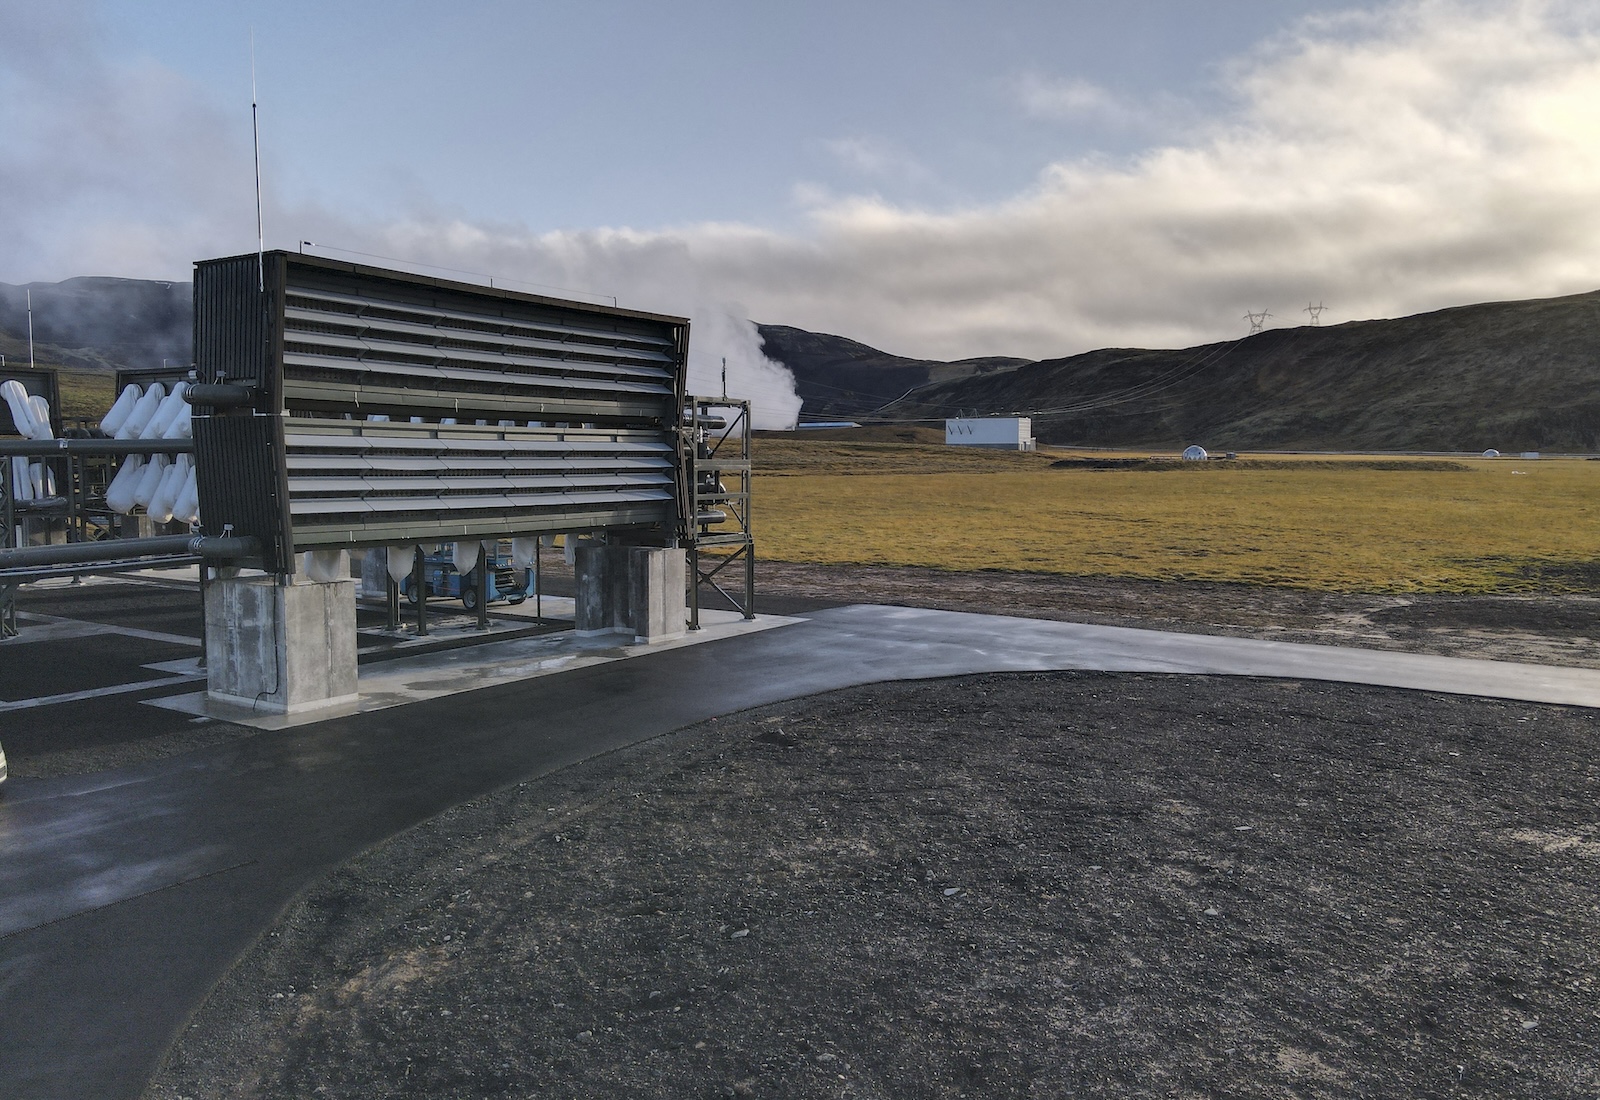 Rectangular direct air capture facility with built-in fans sits on cement with green hills in background.